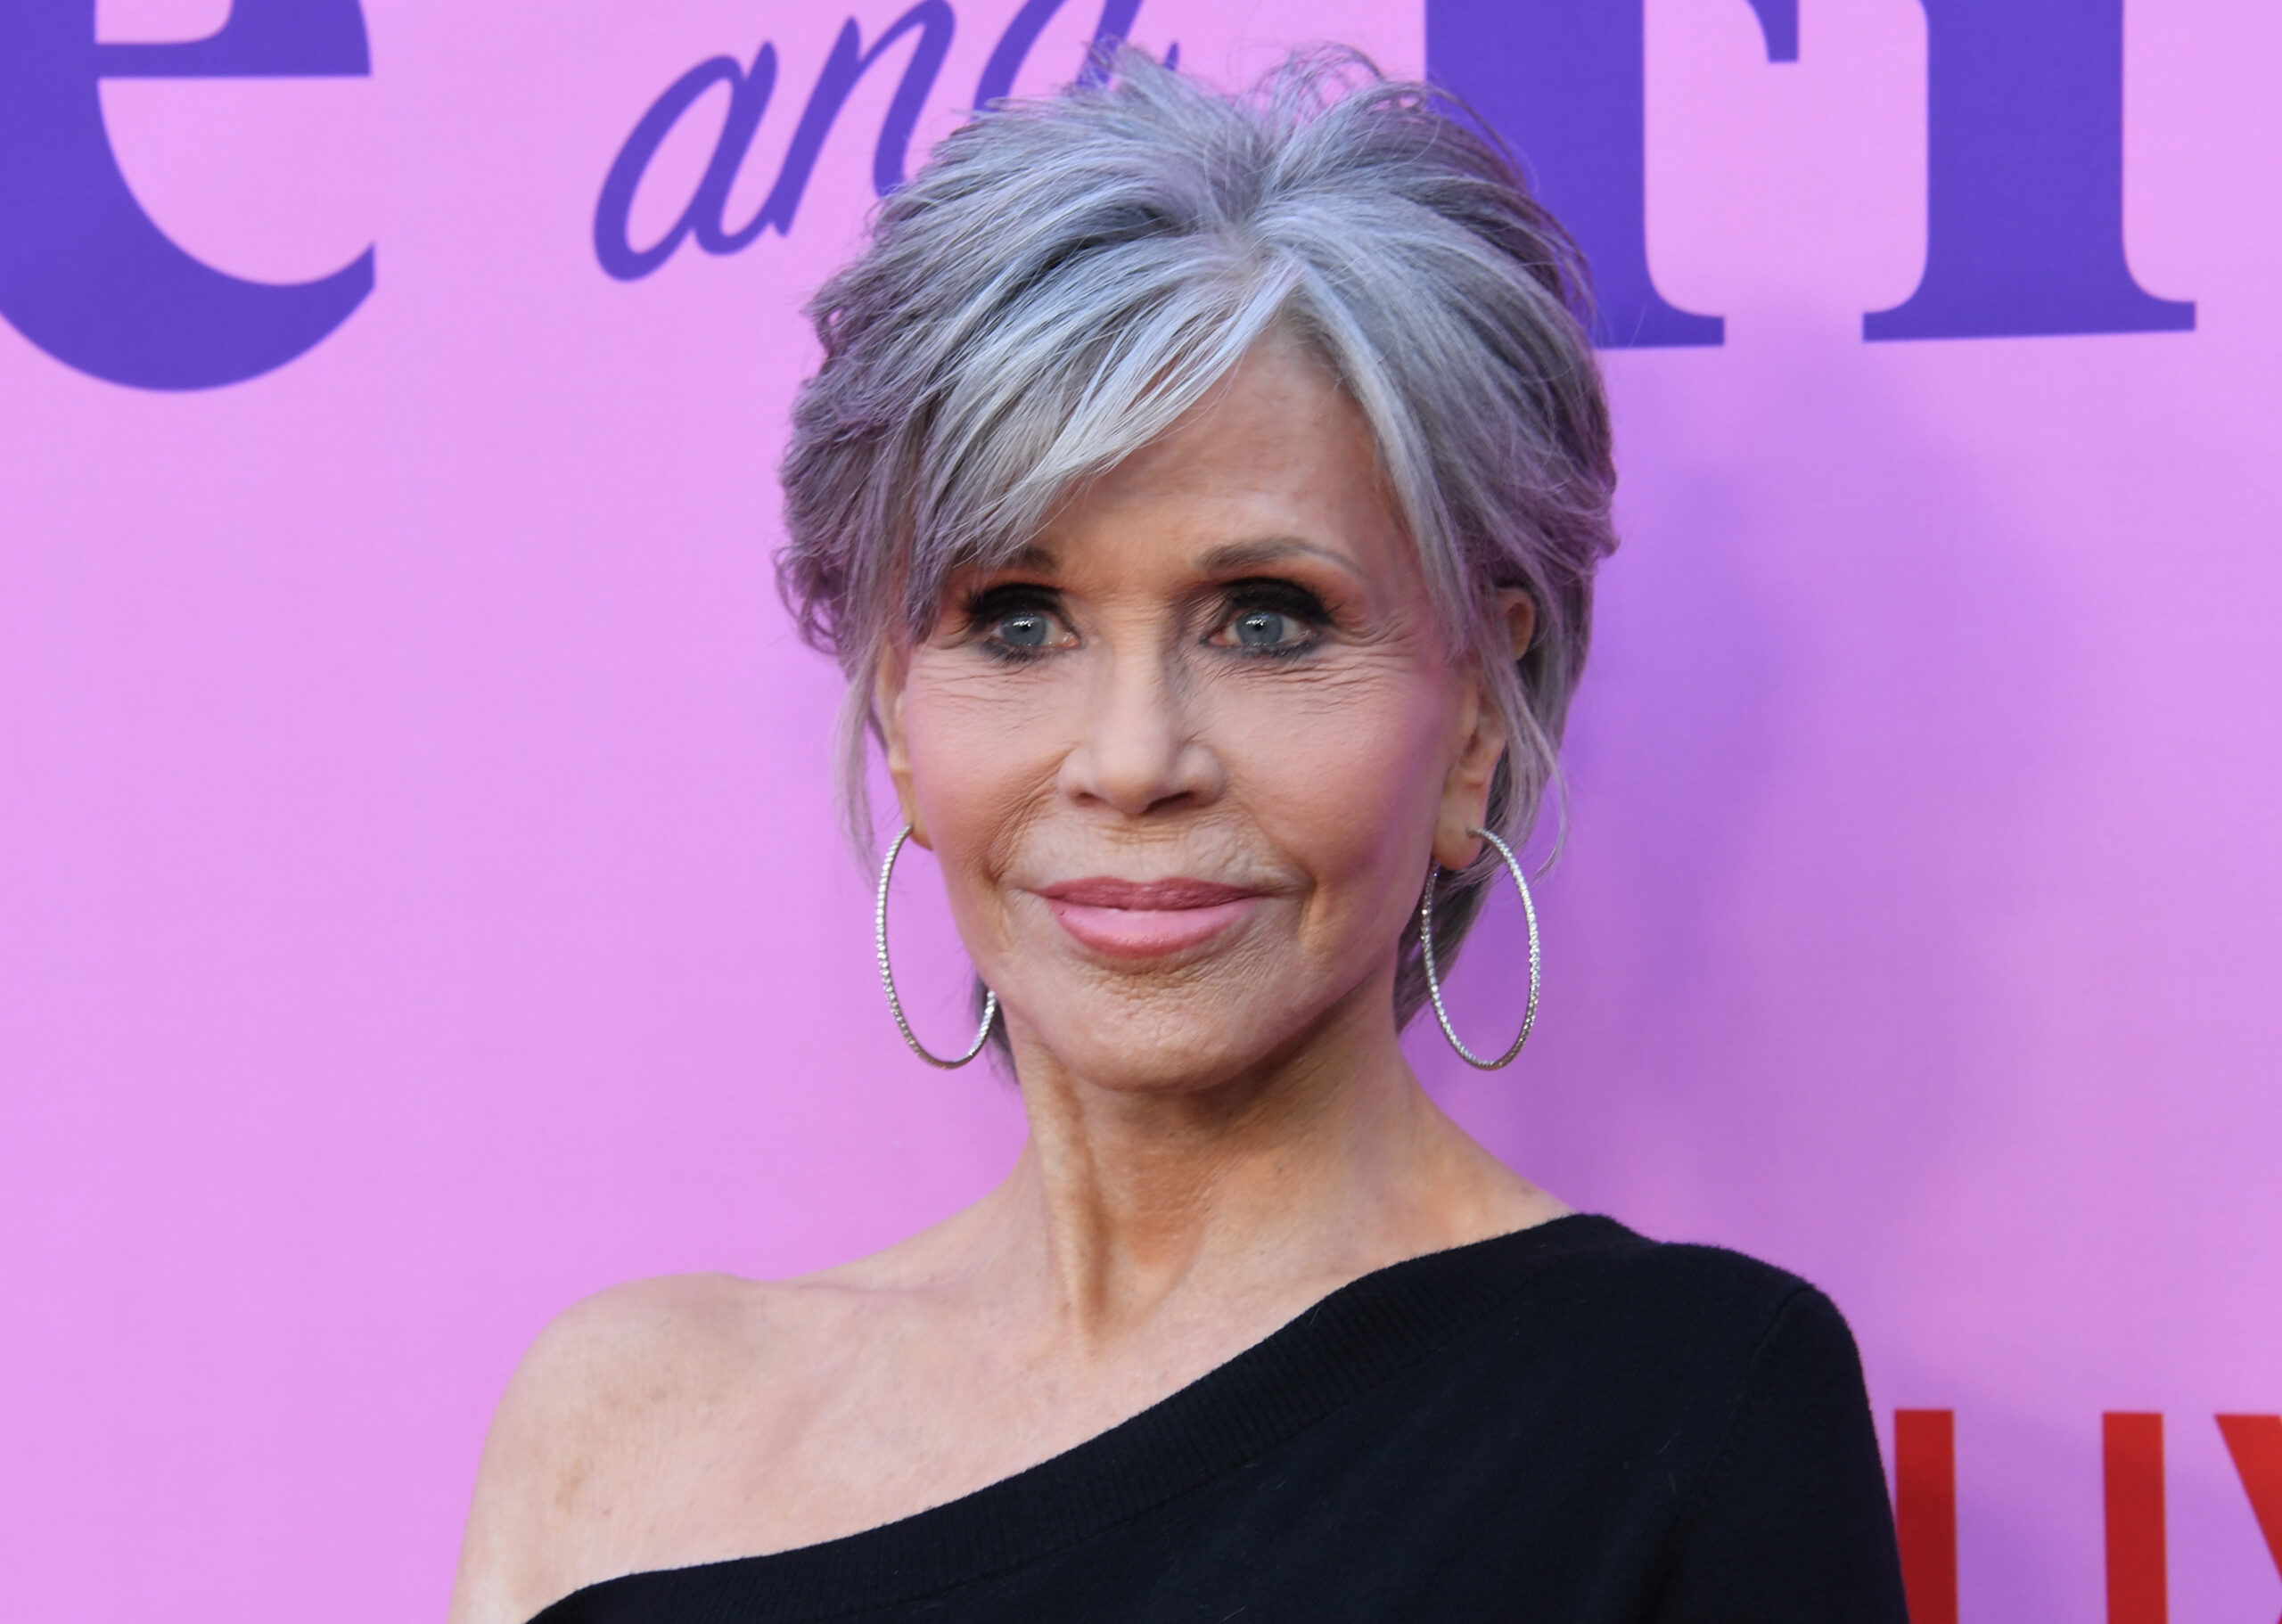 Jane Fonda Suggests ‘Murder’ In Response To Overturning Of Roe V. Wade